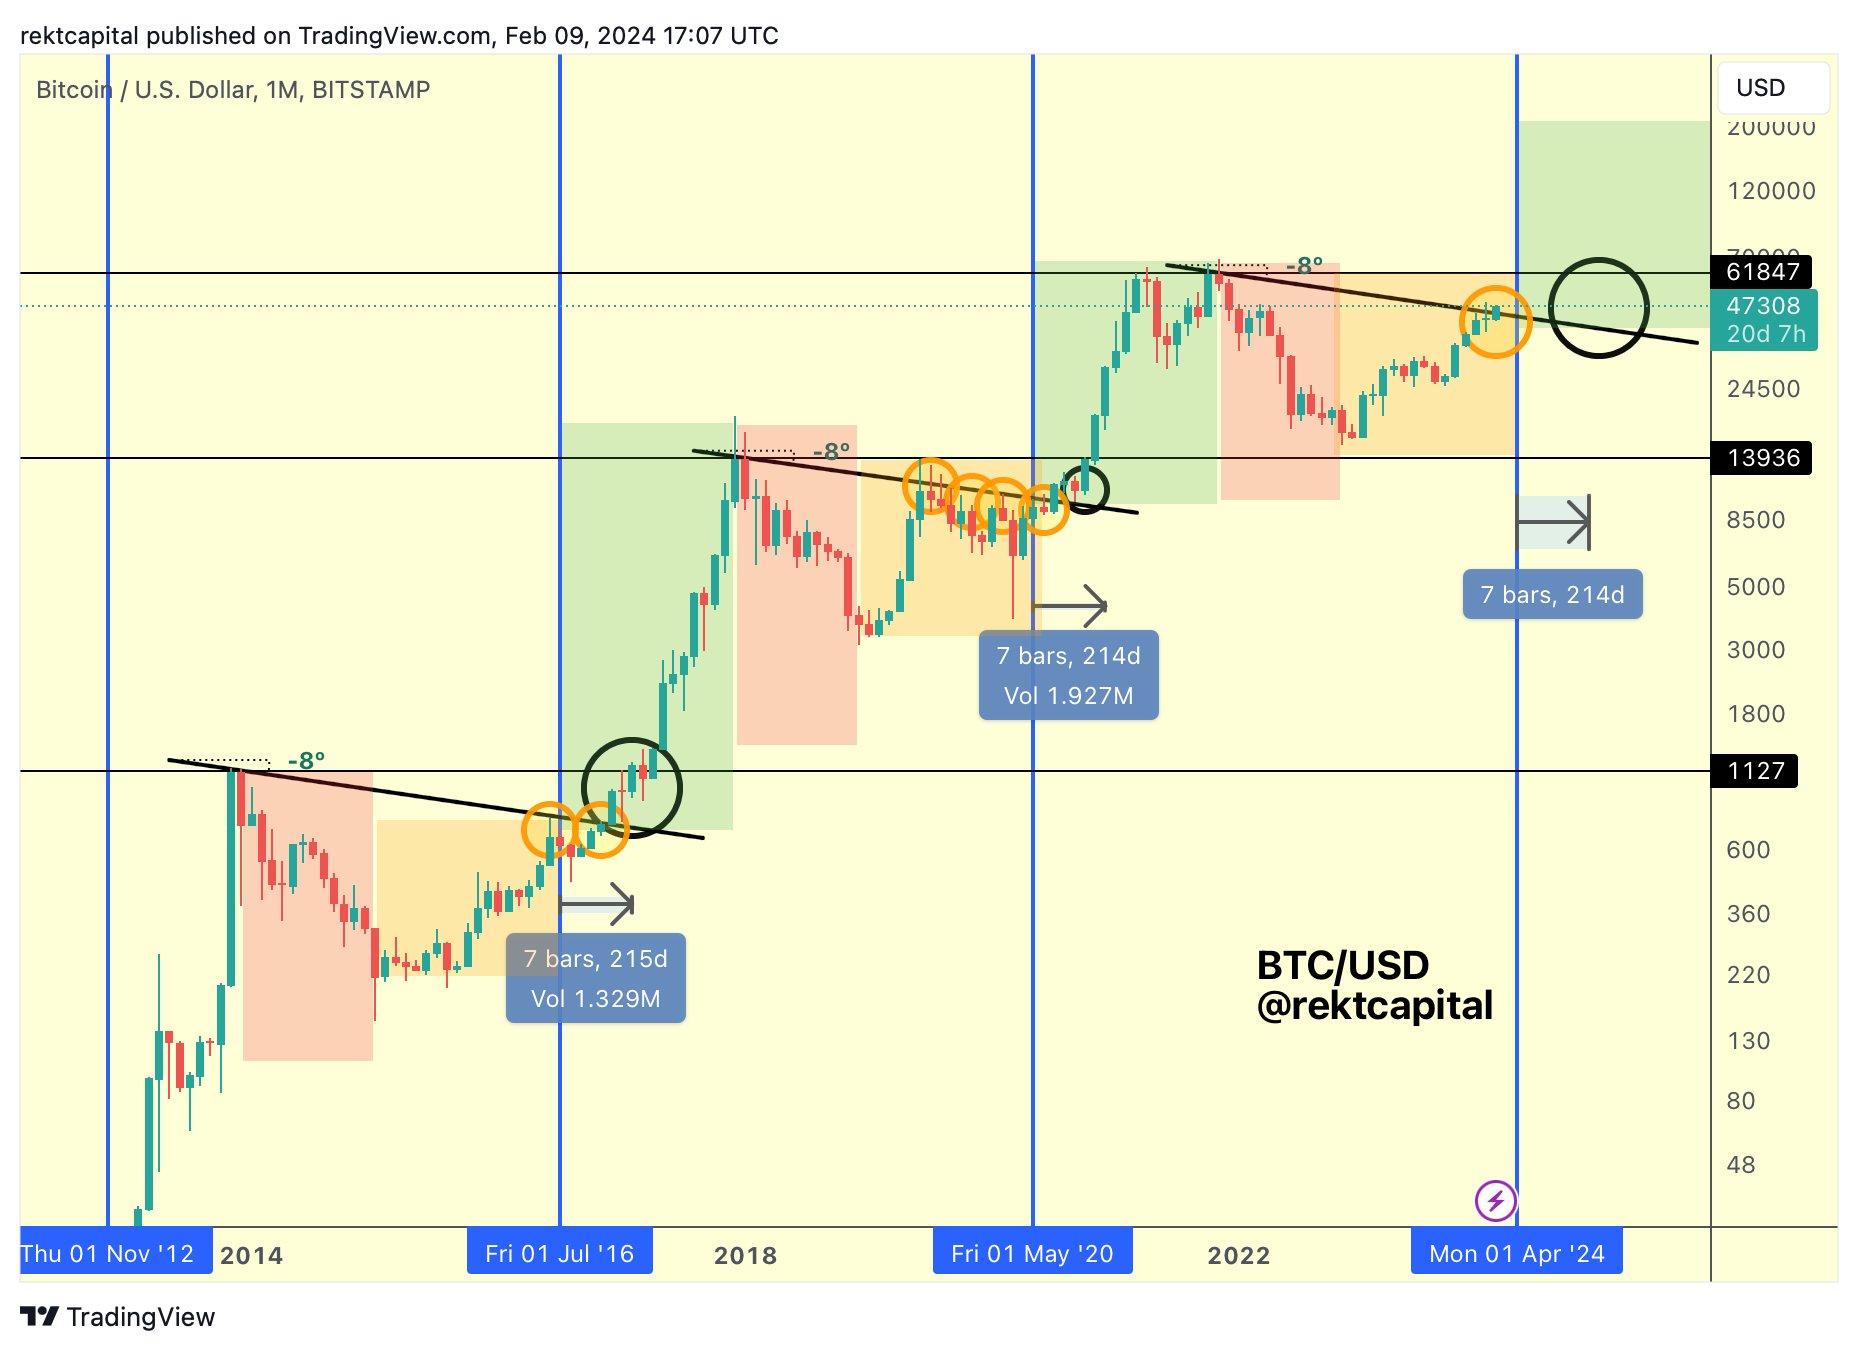 Can Bitcoin Overcome Past Trends? Examining The Pre-Halving Rally And Resistance Levels